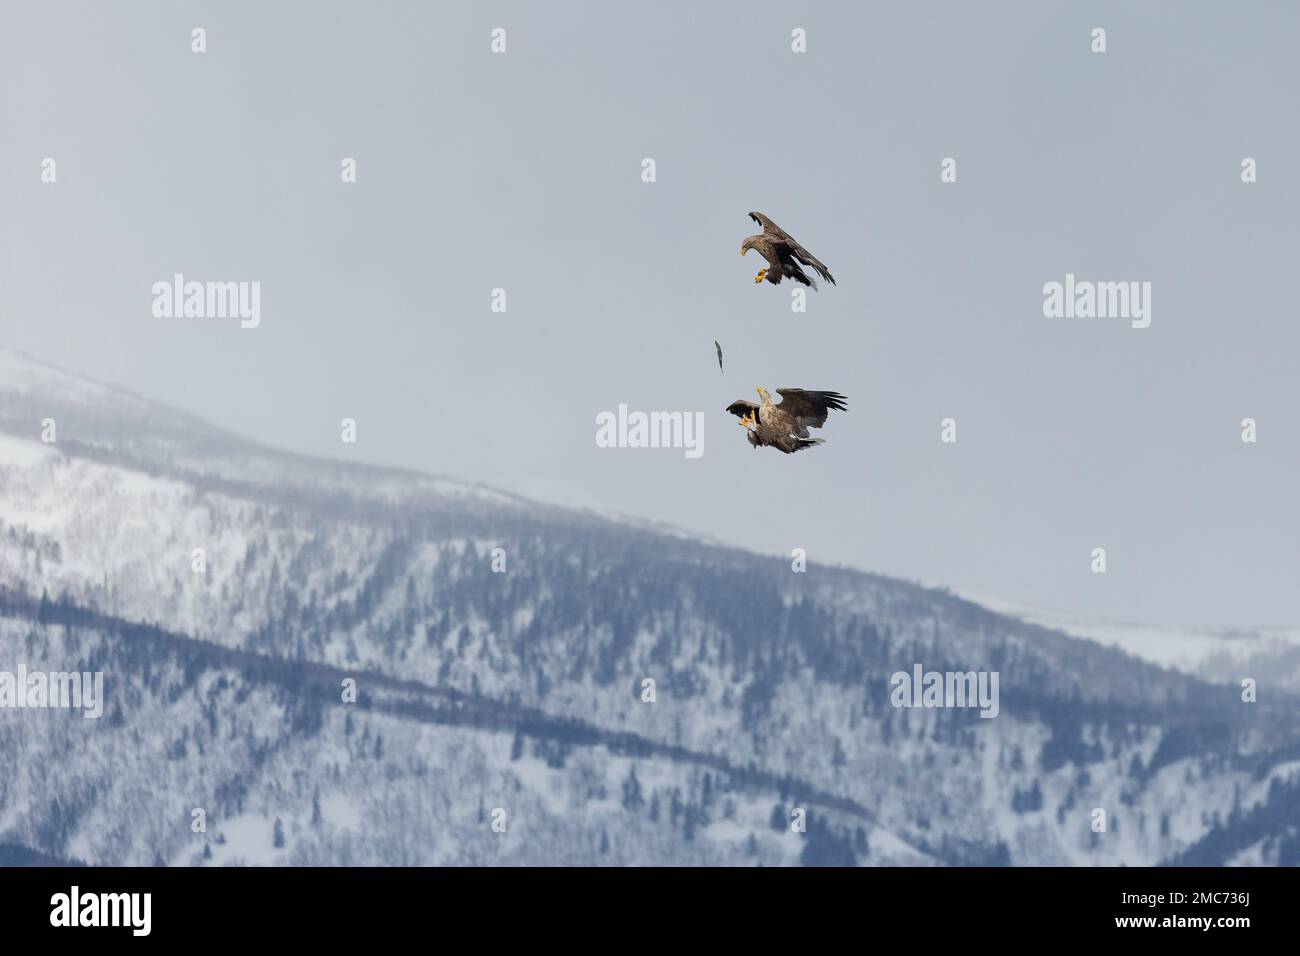 Pair of adult White-tailed Eagles (Haliaeetus albicilla) passing fish in flight over Shiretoko National Park, Hokkaido, Japan (sequence 2 of 7) Stock Photo